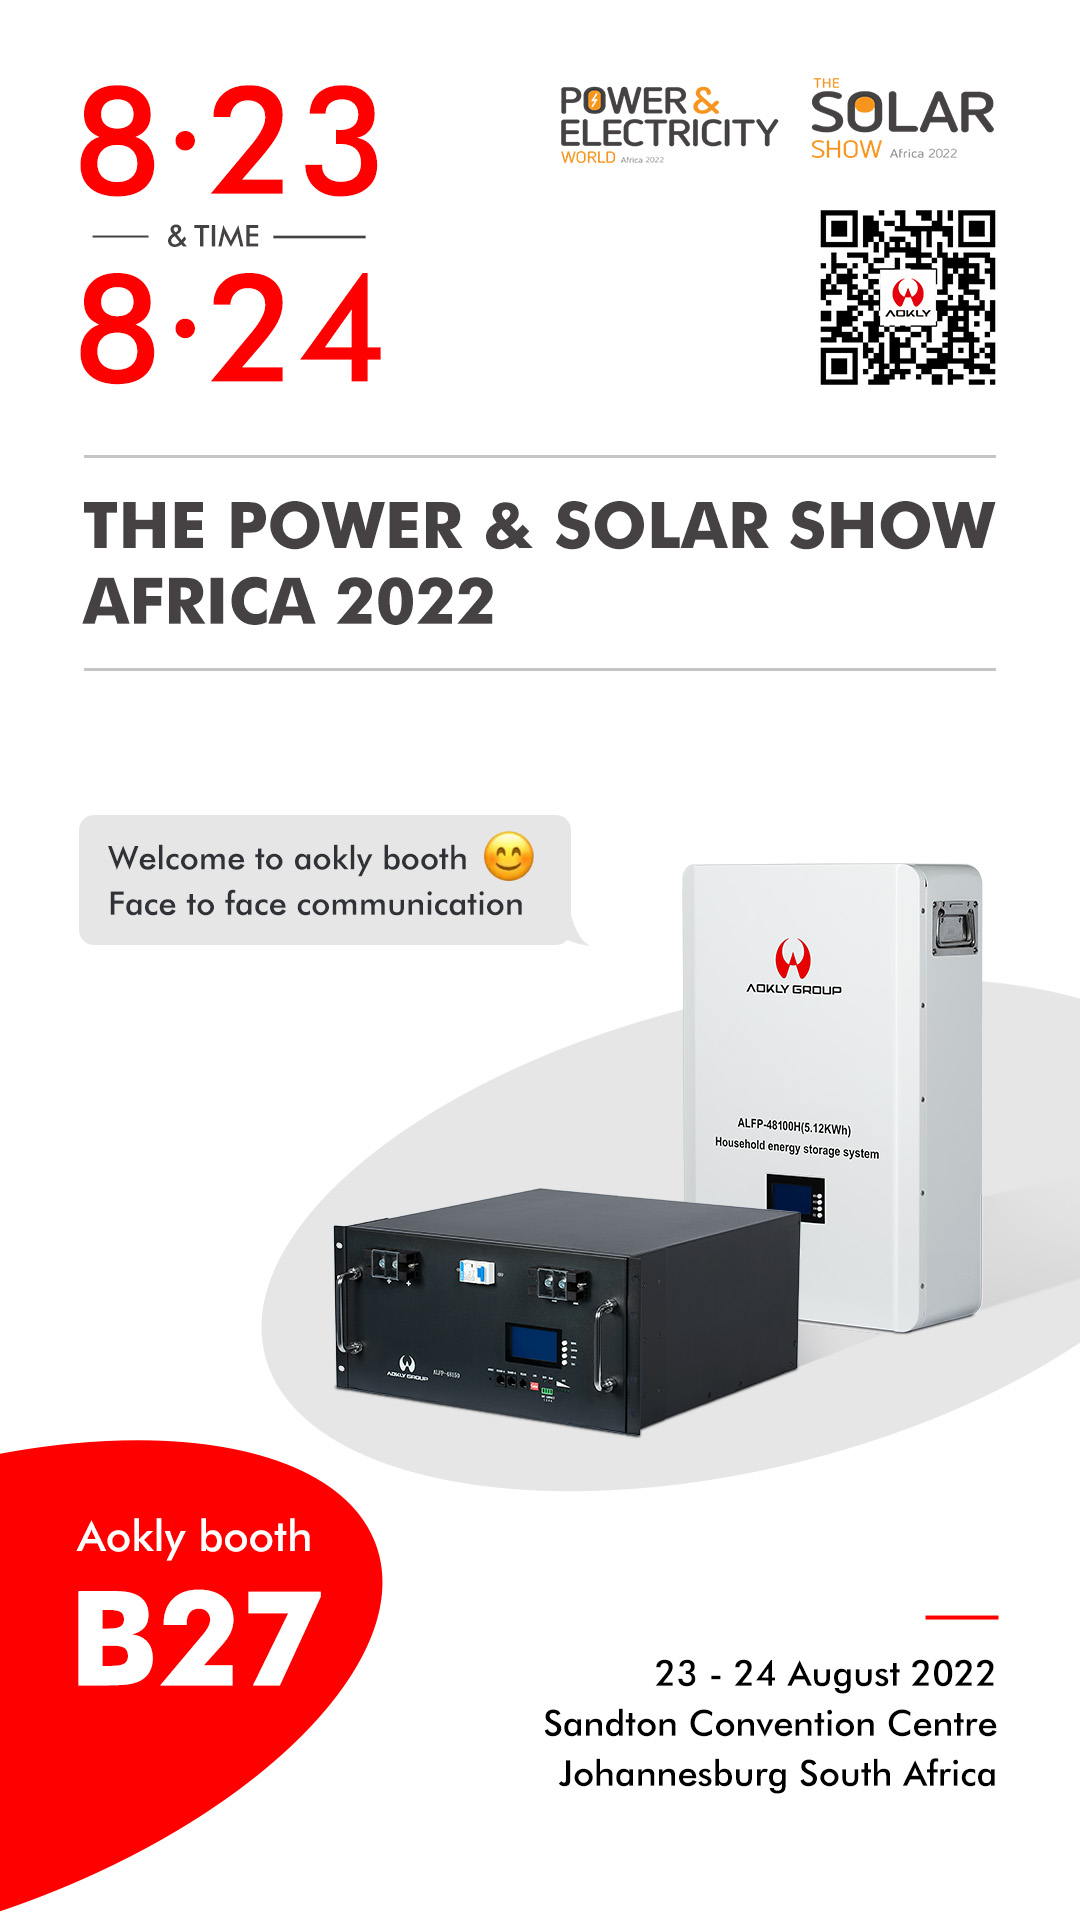 Aokly dans Power & Electricity World Africa & The Solar Show Africa 2022 !